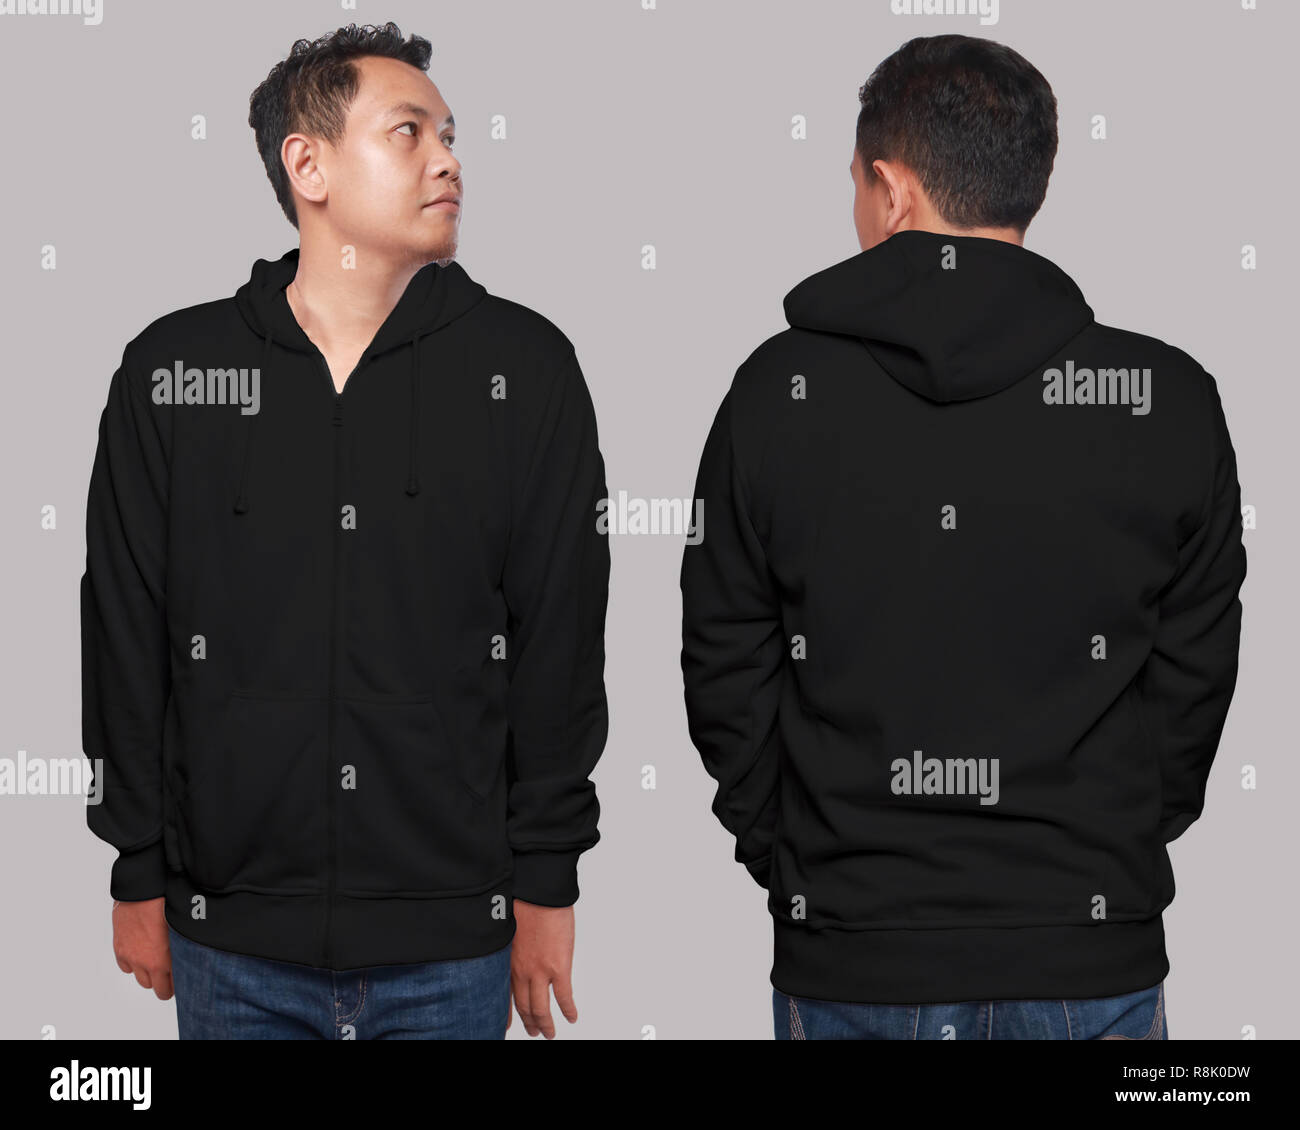 Download Blank Sweatshirt Mock Up Front And Back View Isolated On Grey Asian Male Model Wear Plain Black Hoodie Mockup Hoody Design Presentation Jumper F Stock Photo Alamy